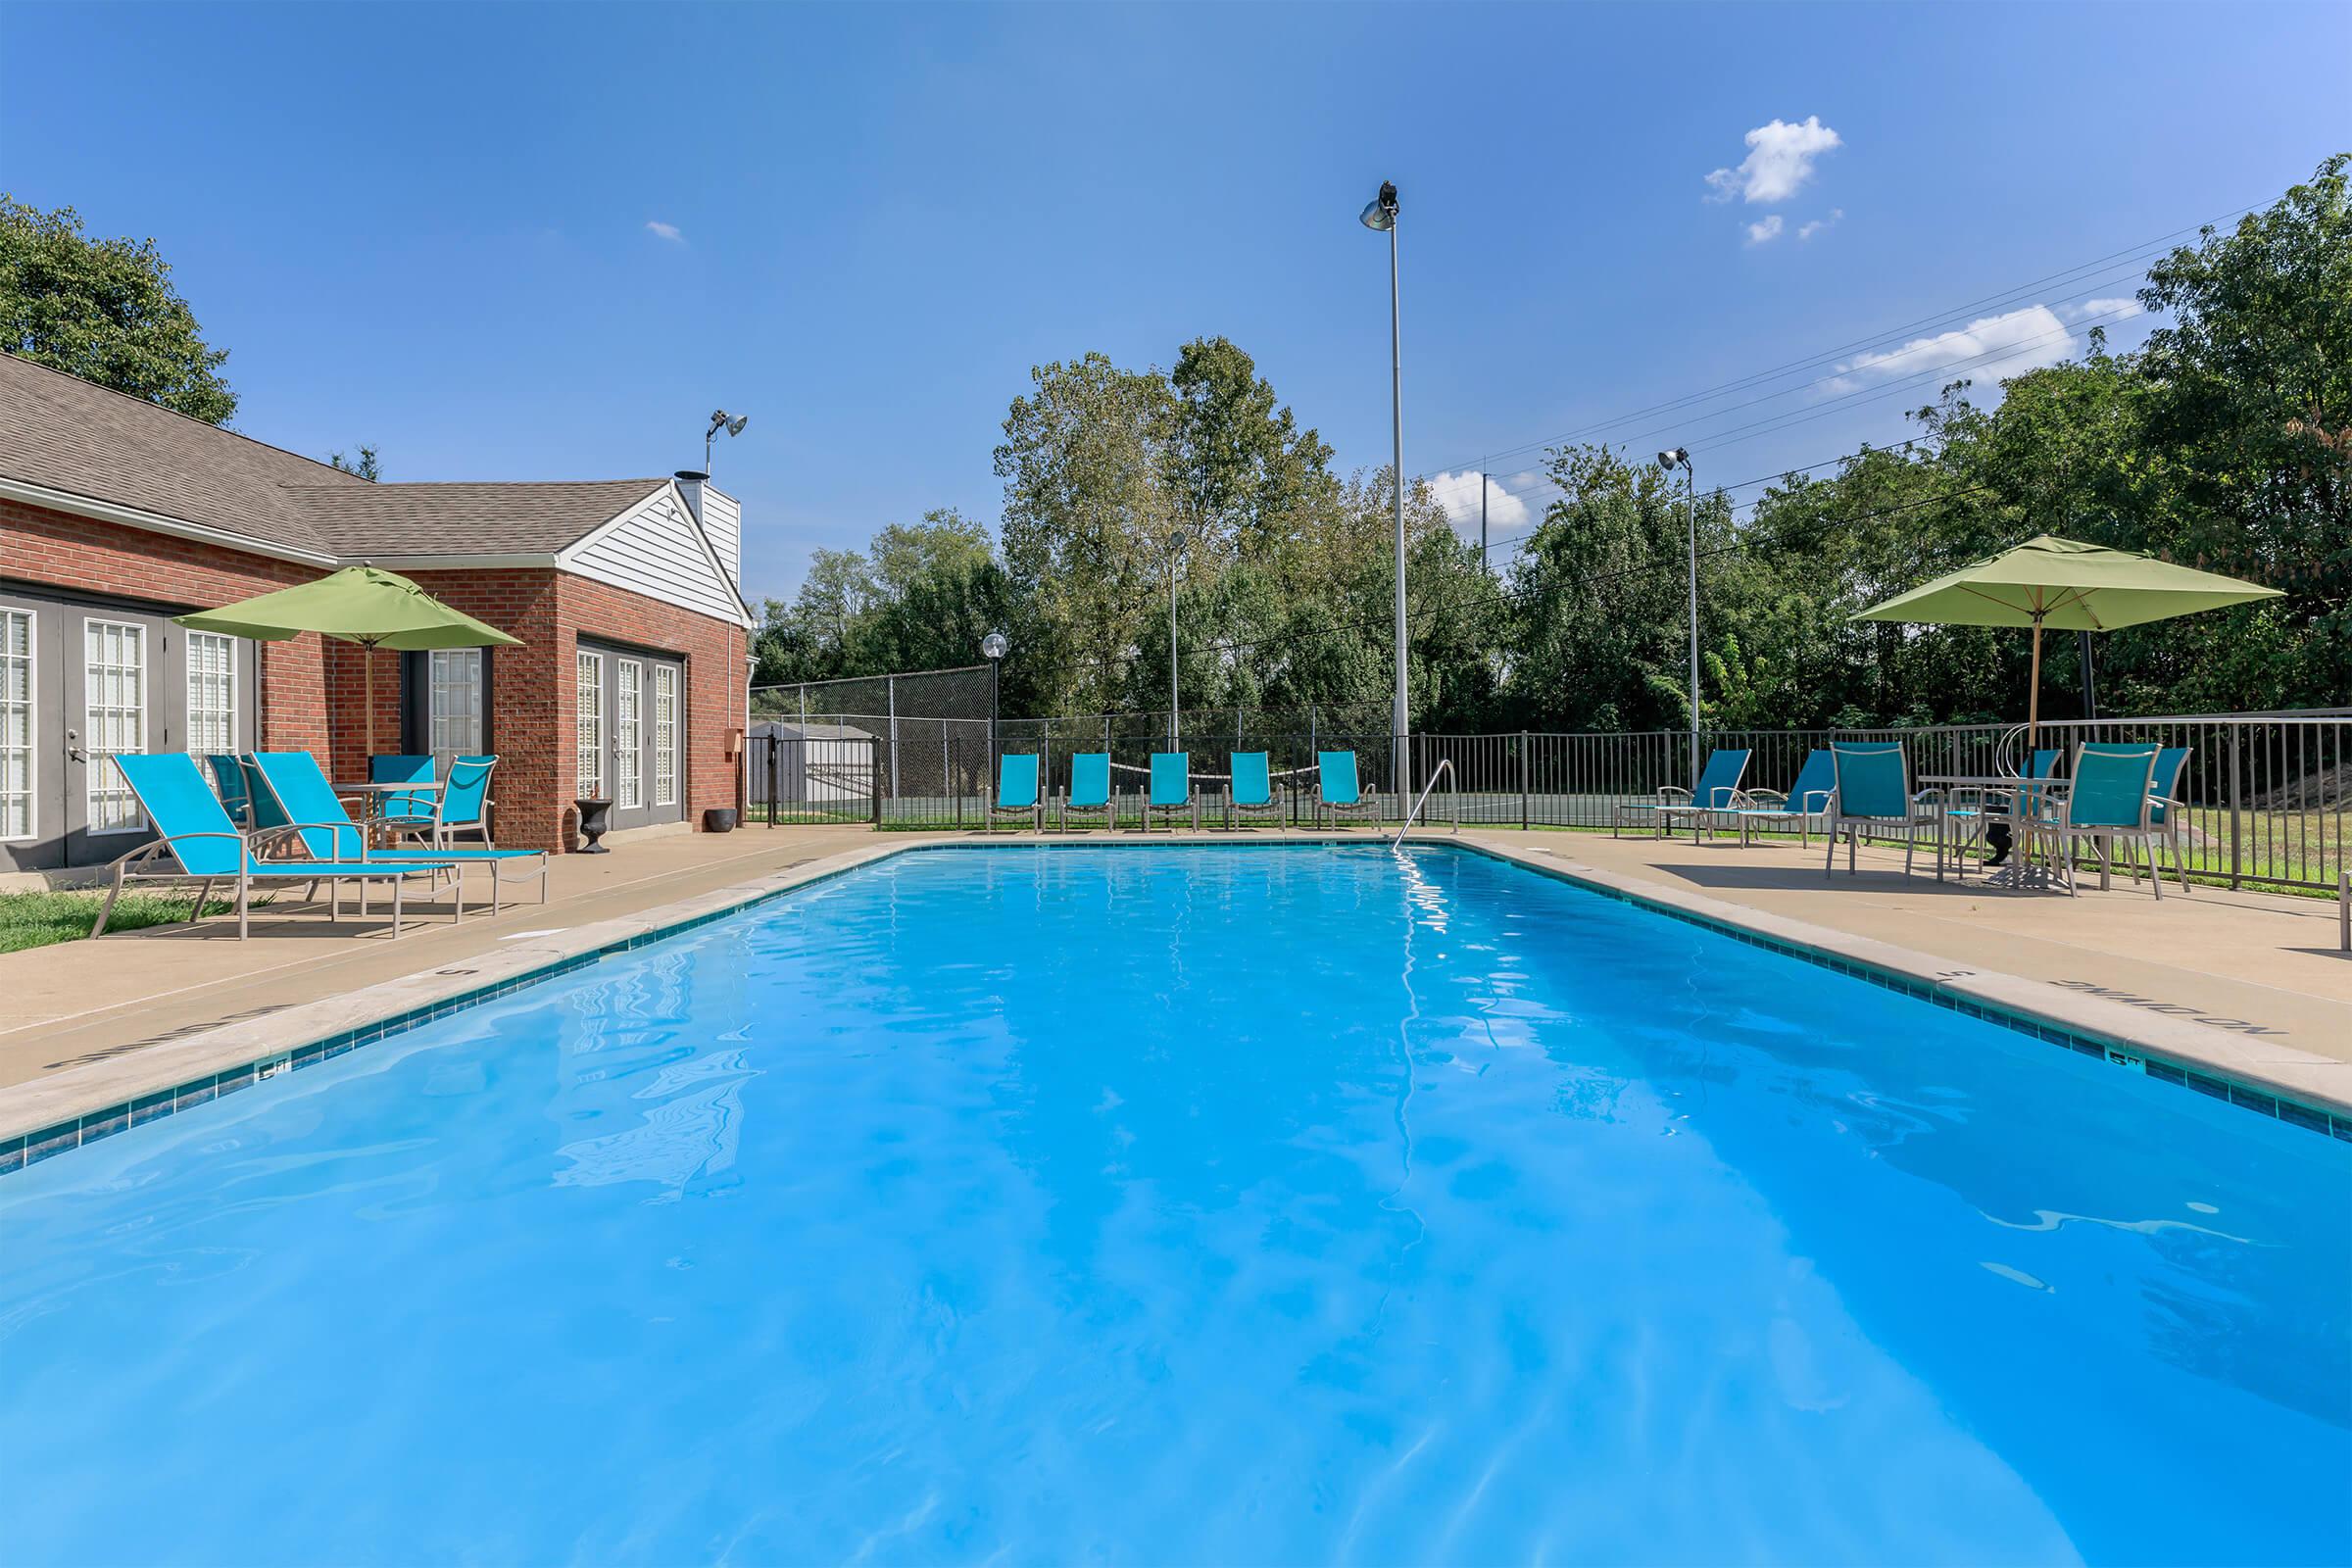 Enjoy the shimmering swimming pool at Graymere in Columbia, TN